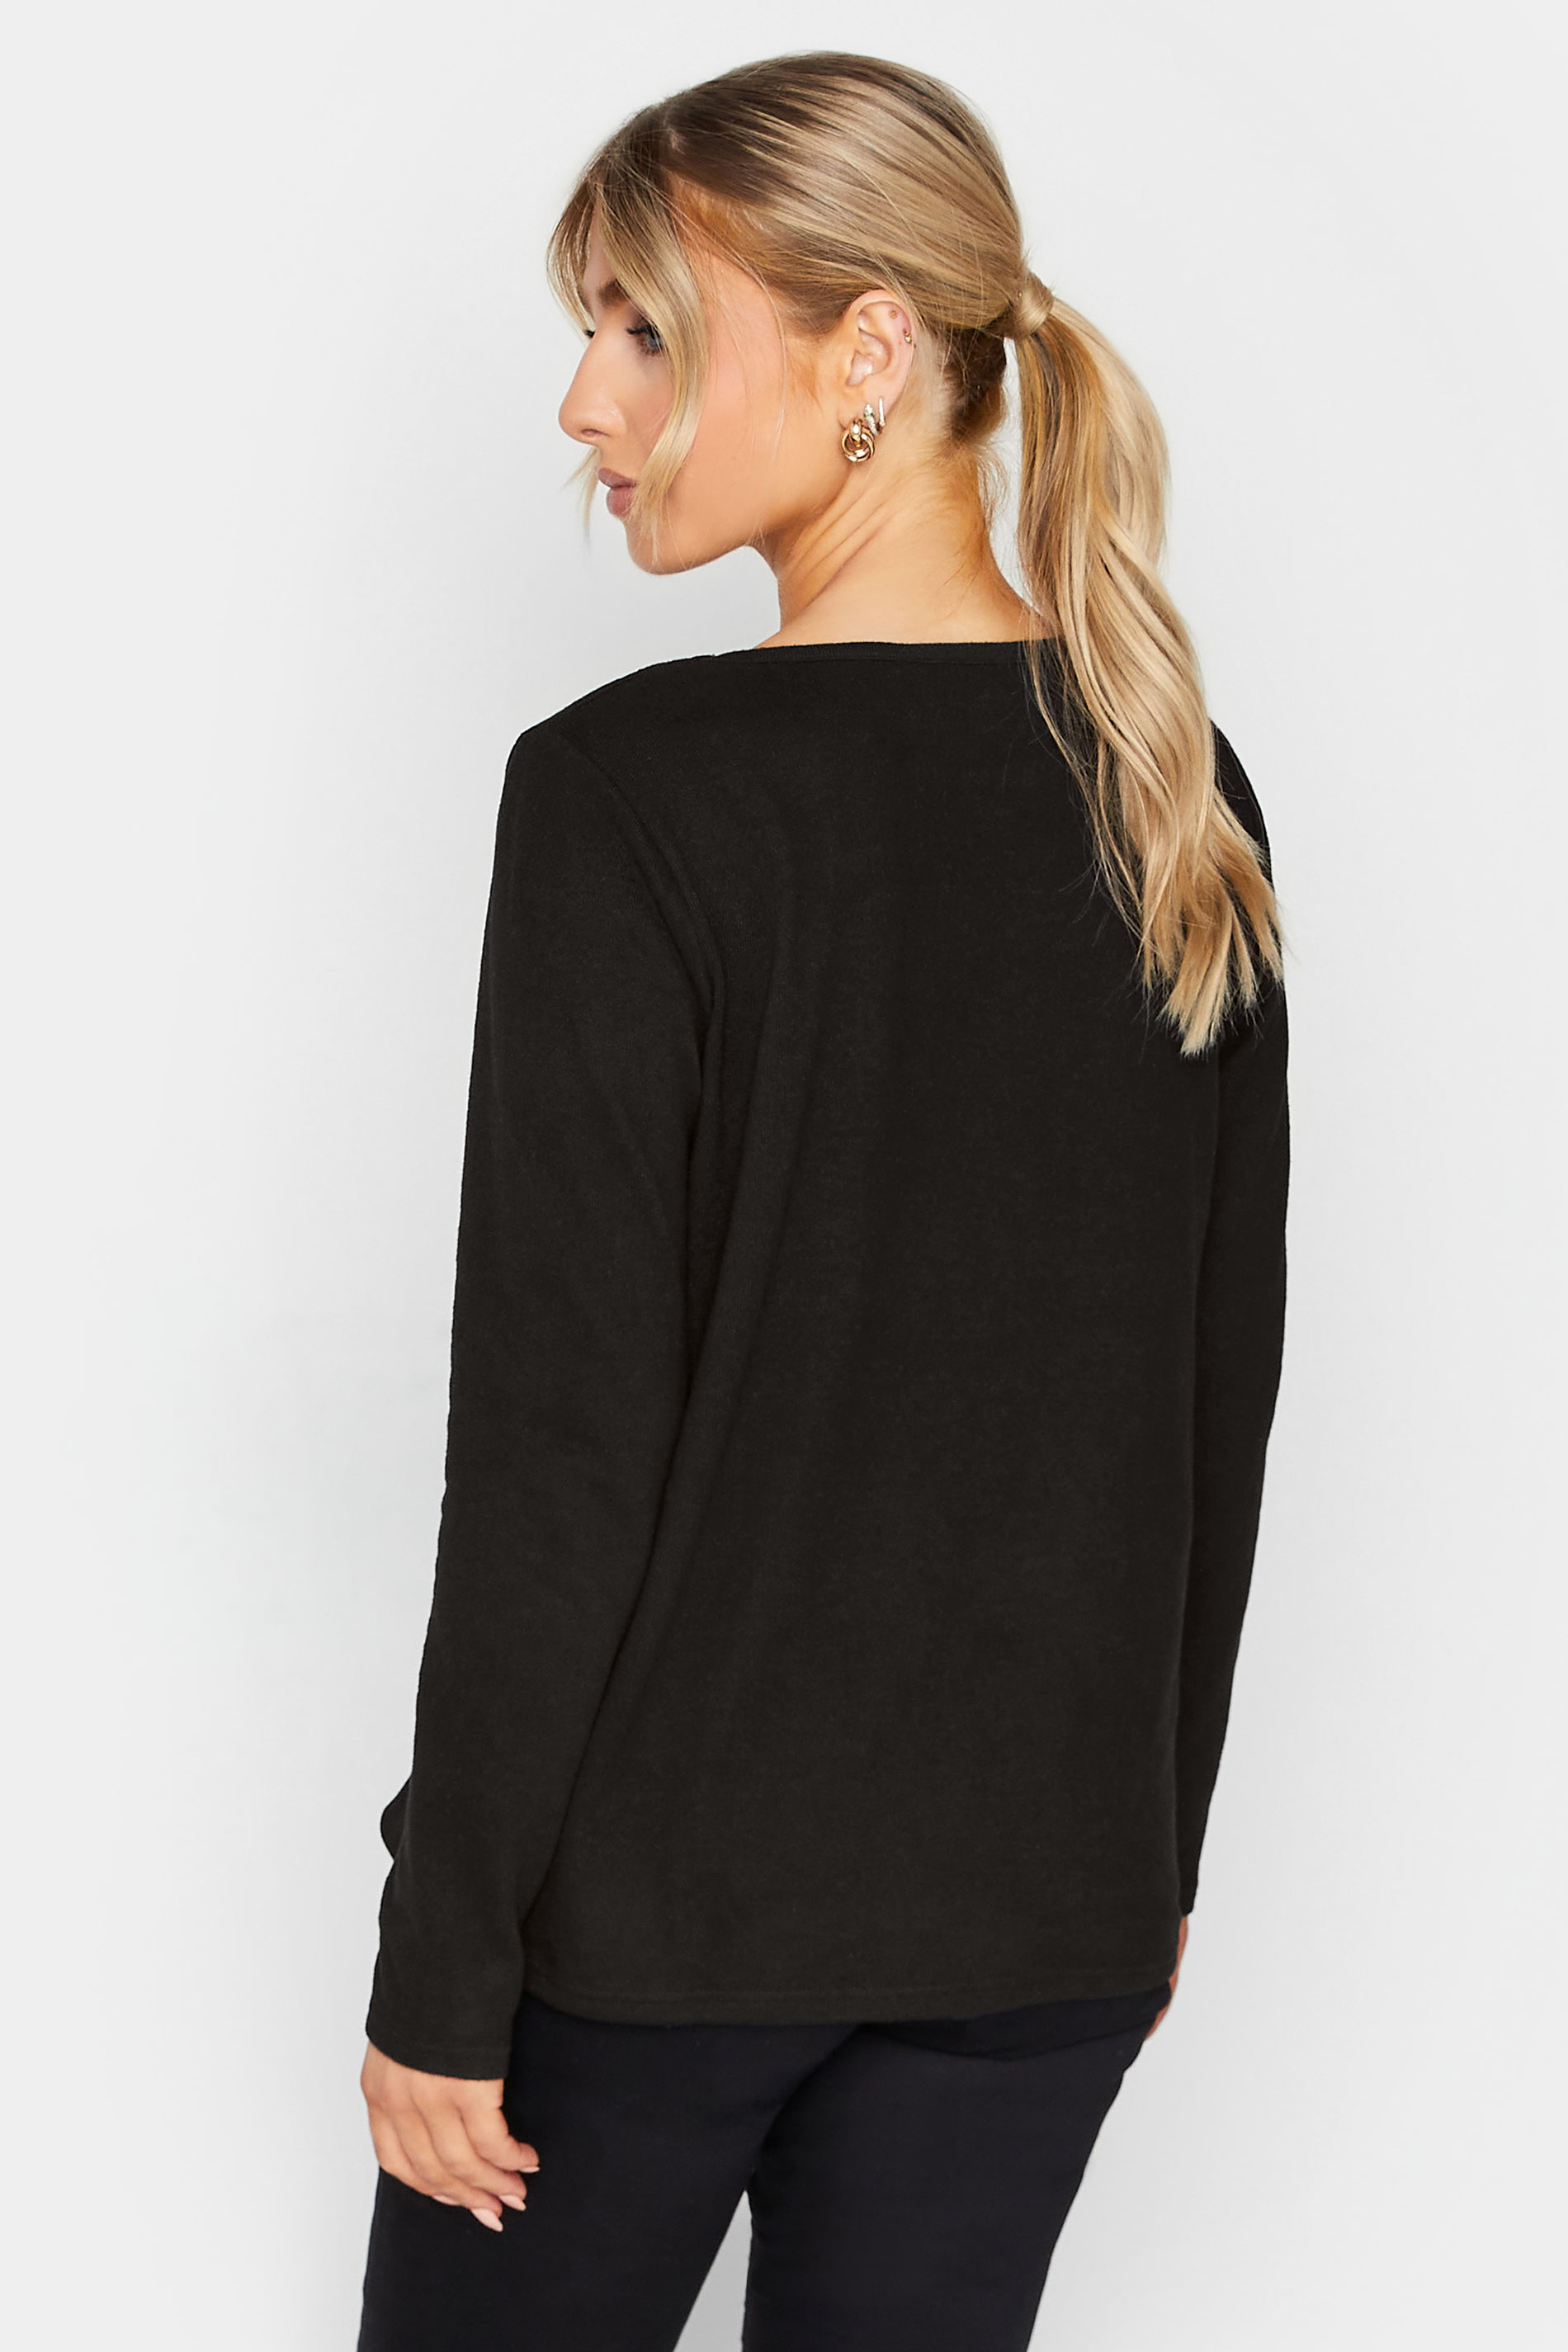 M&Co Black Sequin Star Soft Touch Jumper | M&Co 3